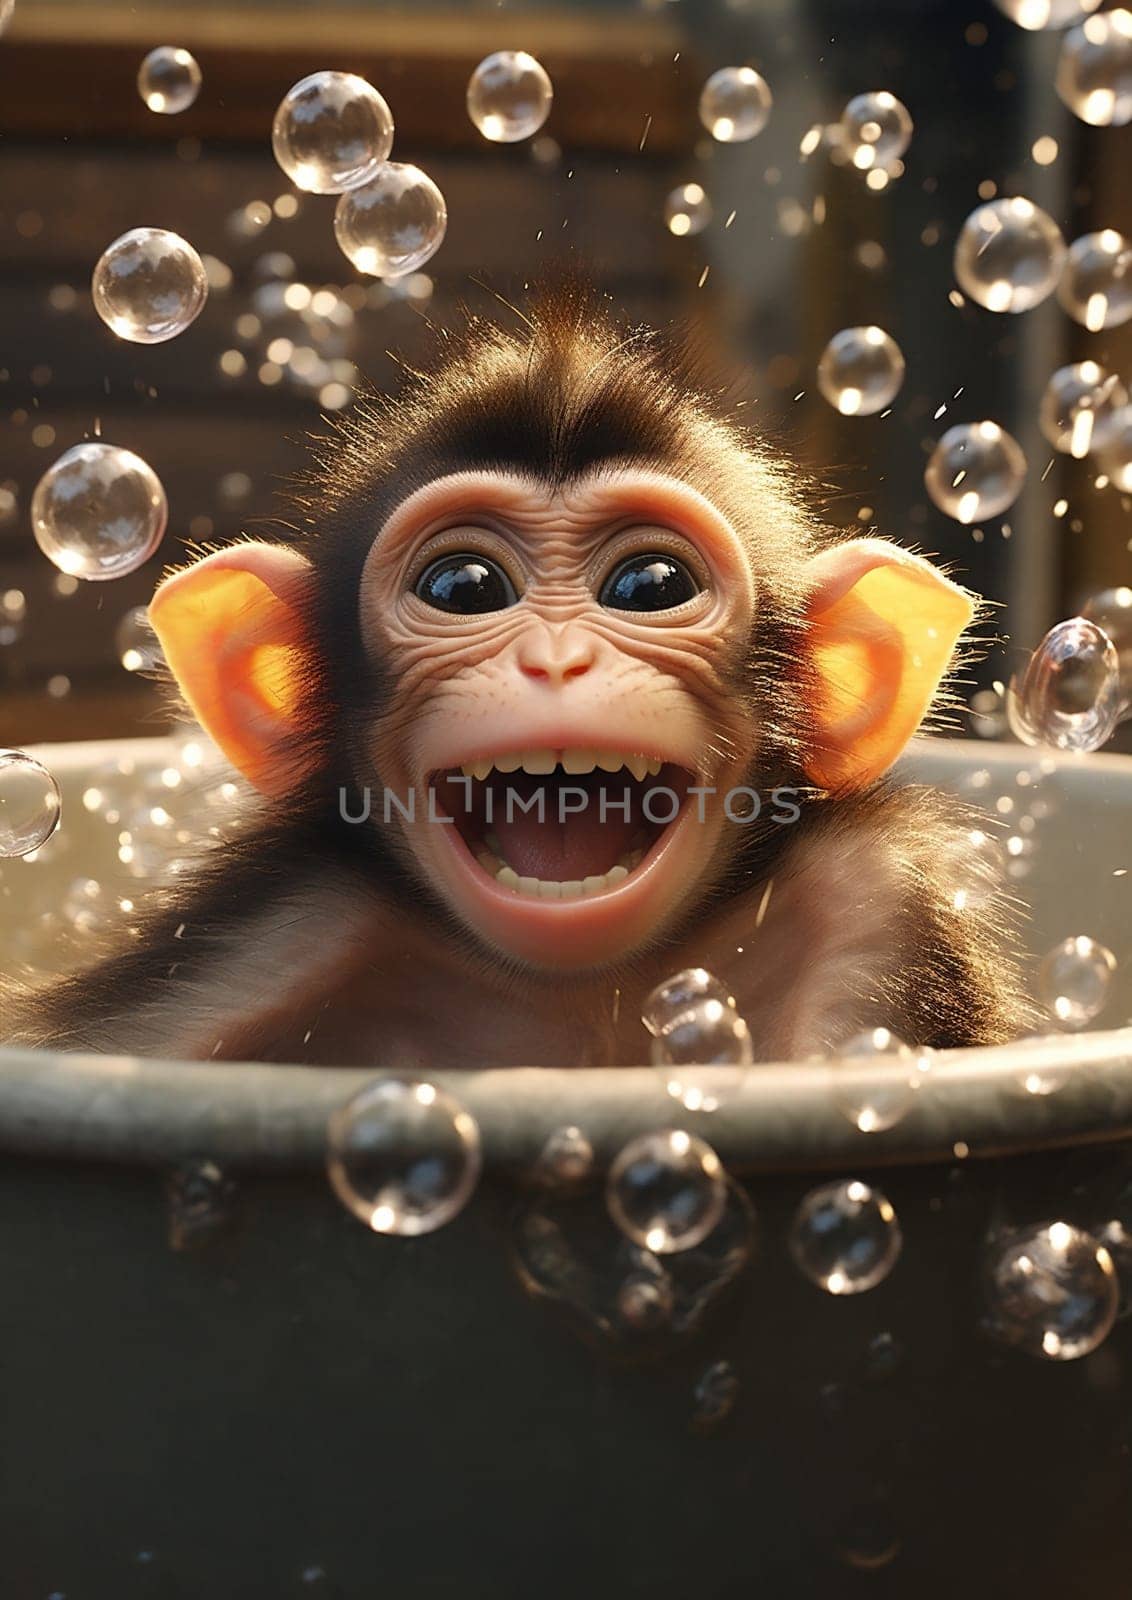 Wild mammal monkey tree cute animals forest macaque primate wildlife face portrait nature by Vichizh